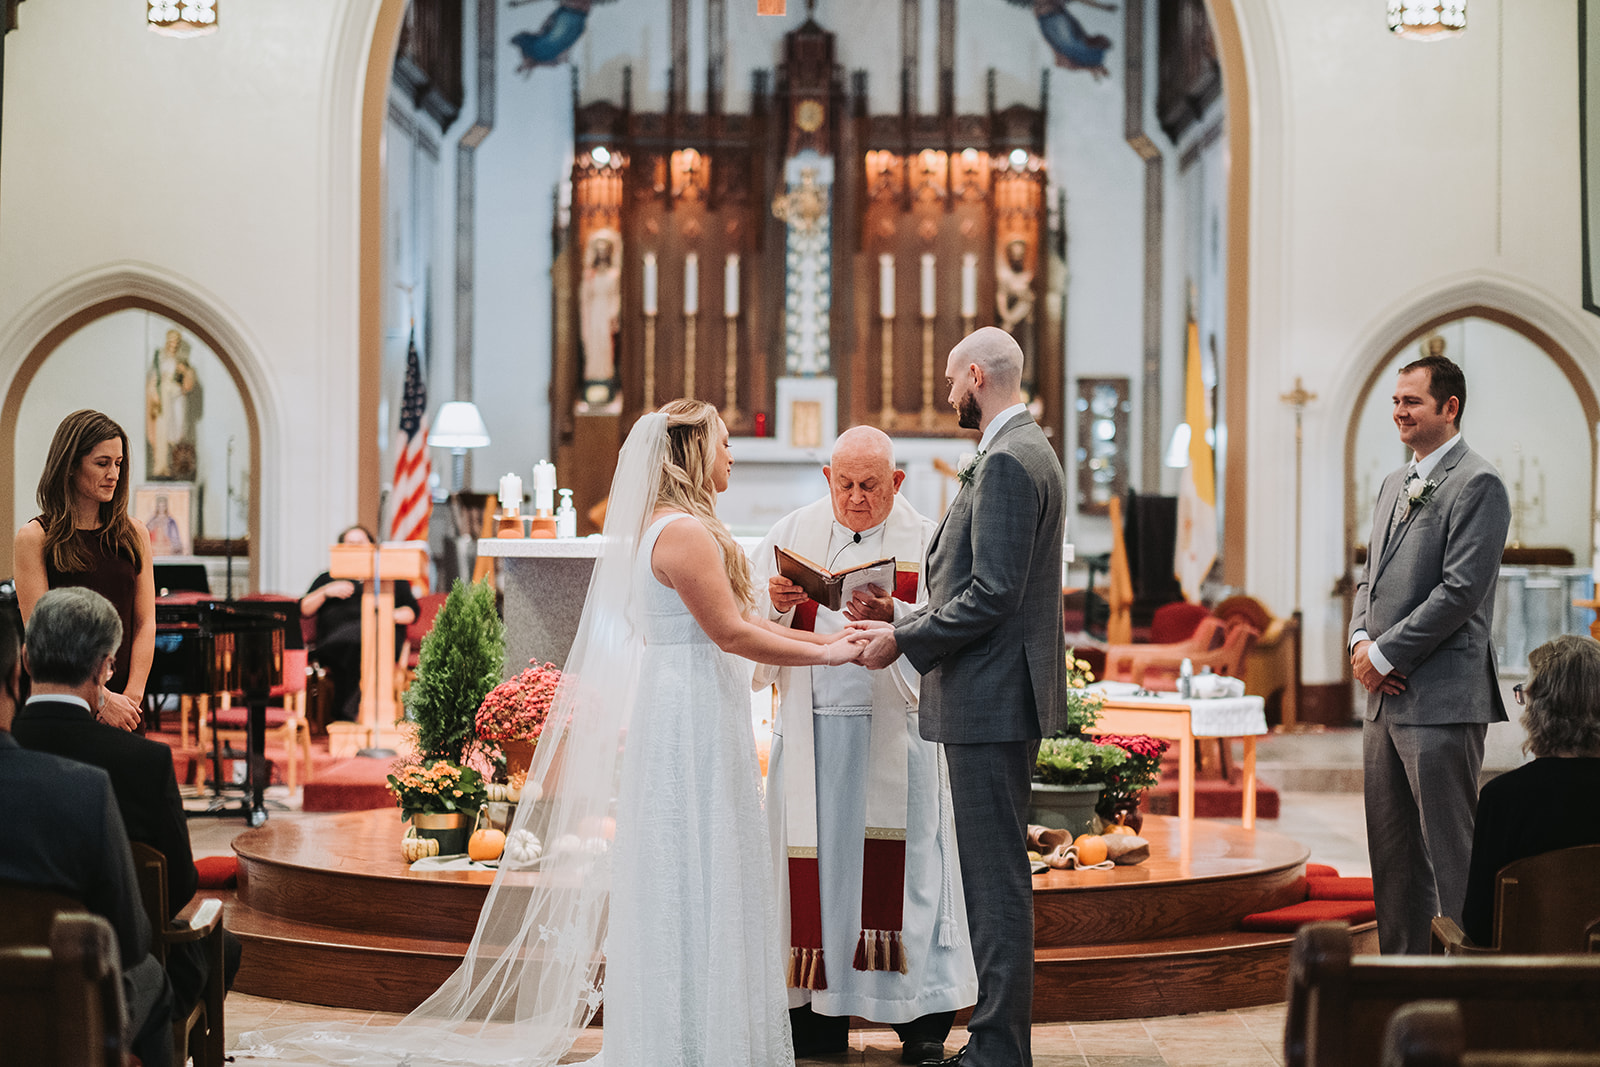 Couple saying vows in an intimate catholic church wedding. 